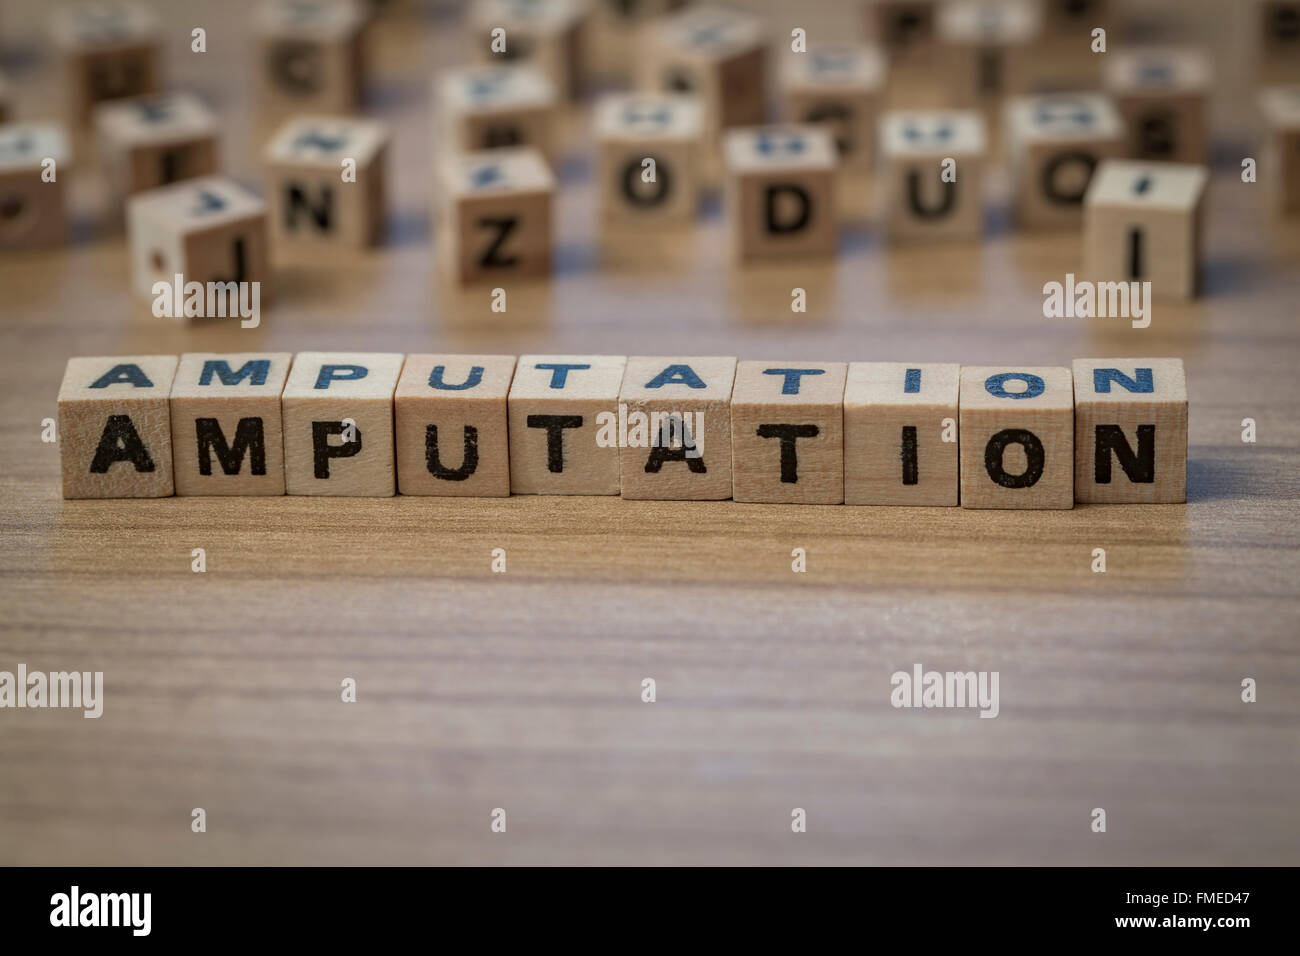 Amputation written in wooden cubes on a table Stock Photo